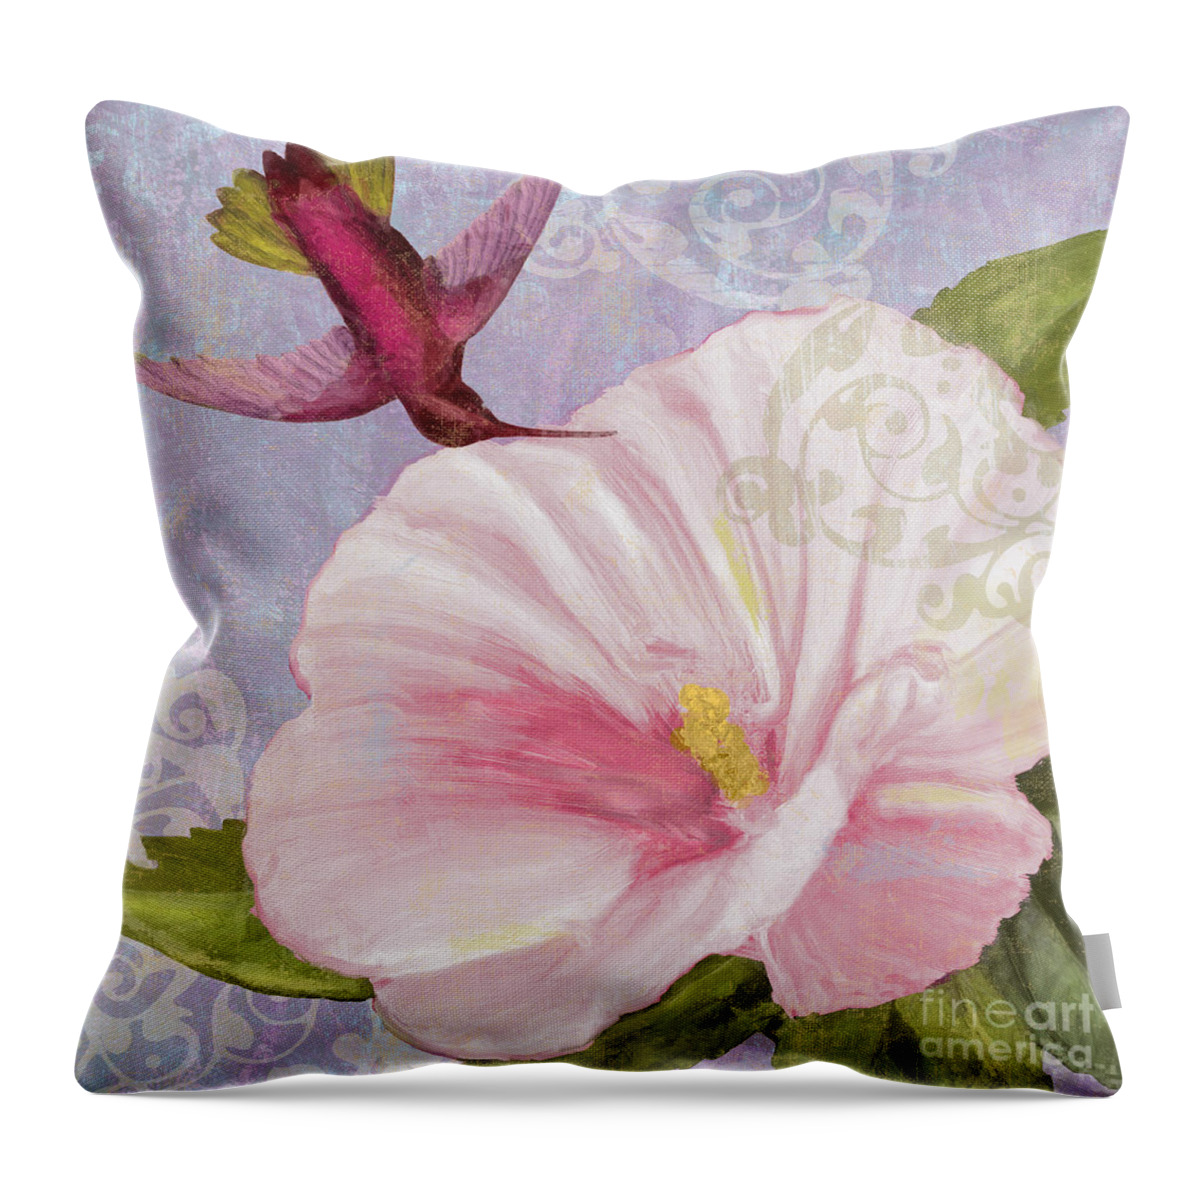 Hummingbird Throw Pillow featuring the painting Hummingbird Hibiscus II by Mindy Sommers